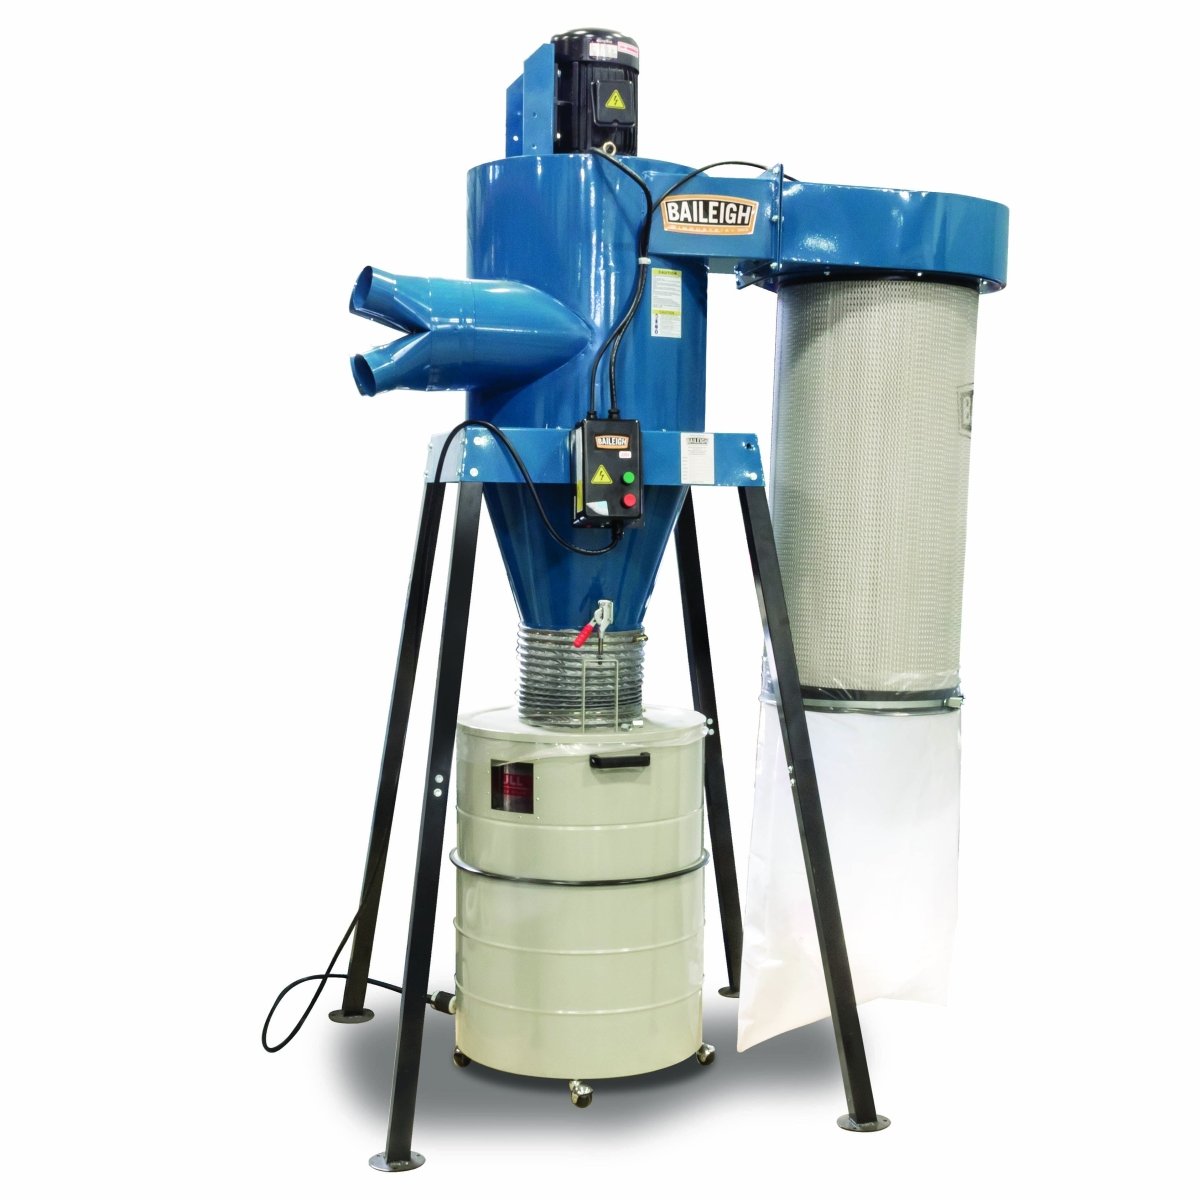 5HP Cyclone Dust Collector DC-3600C - Diamond Tool Store